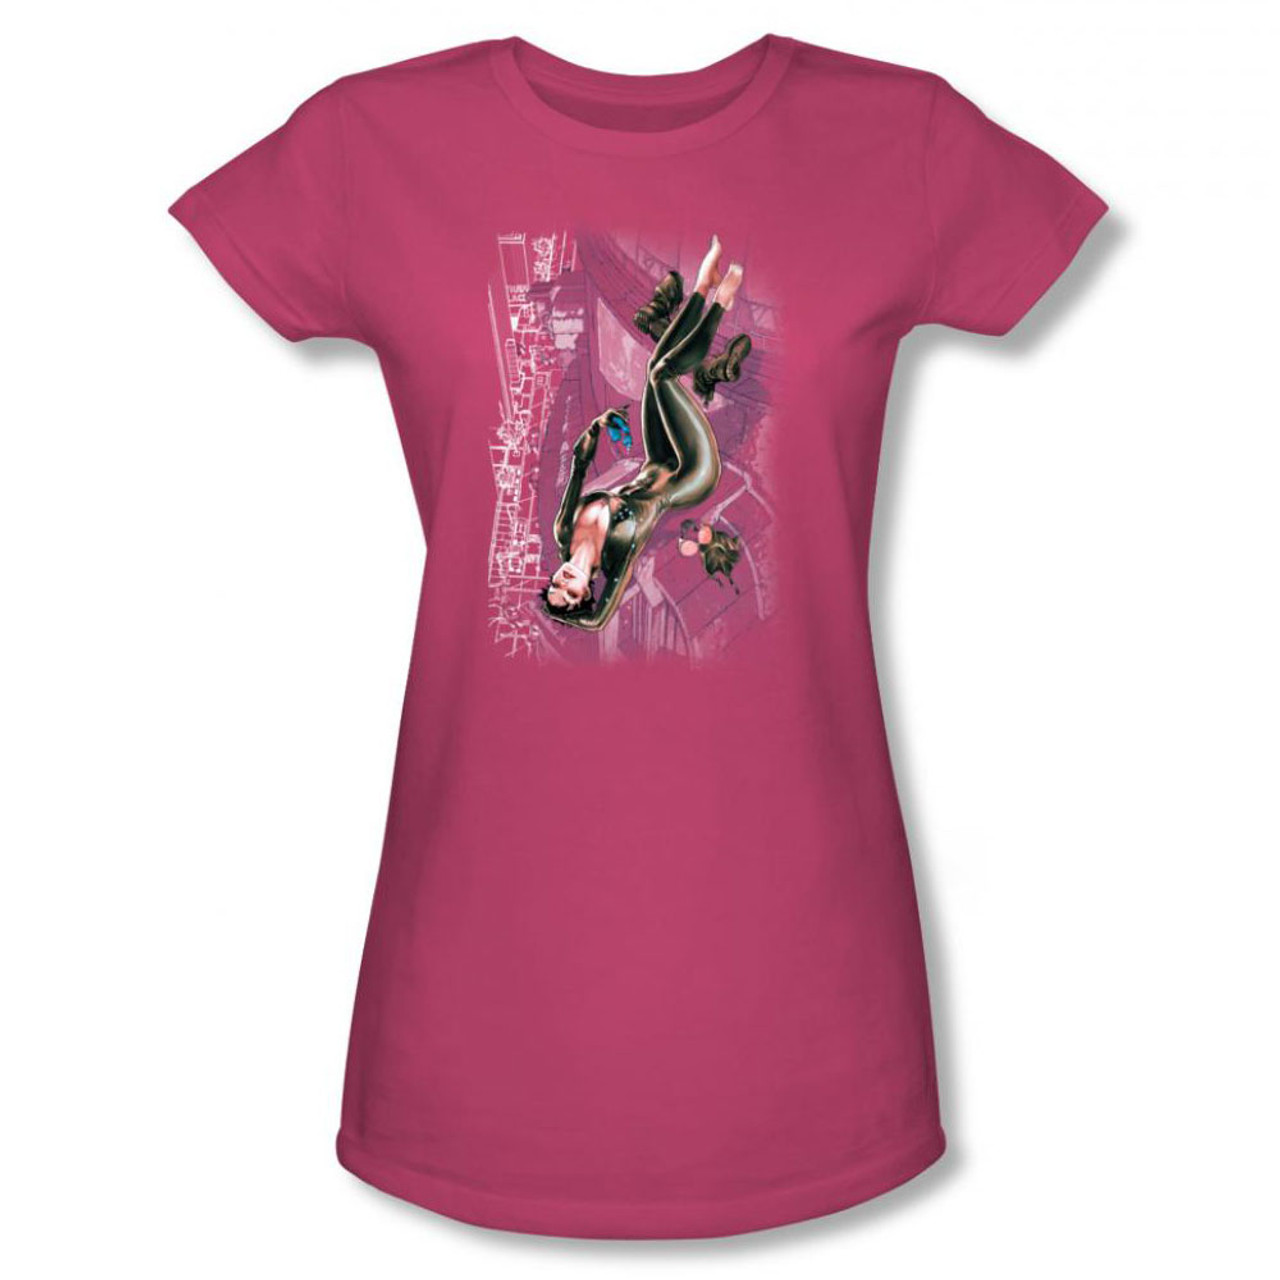 Catwoman #1 Baby Tee